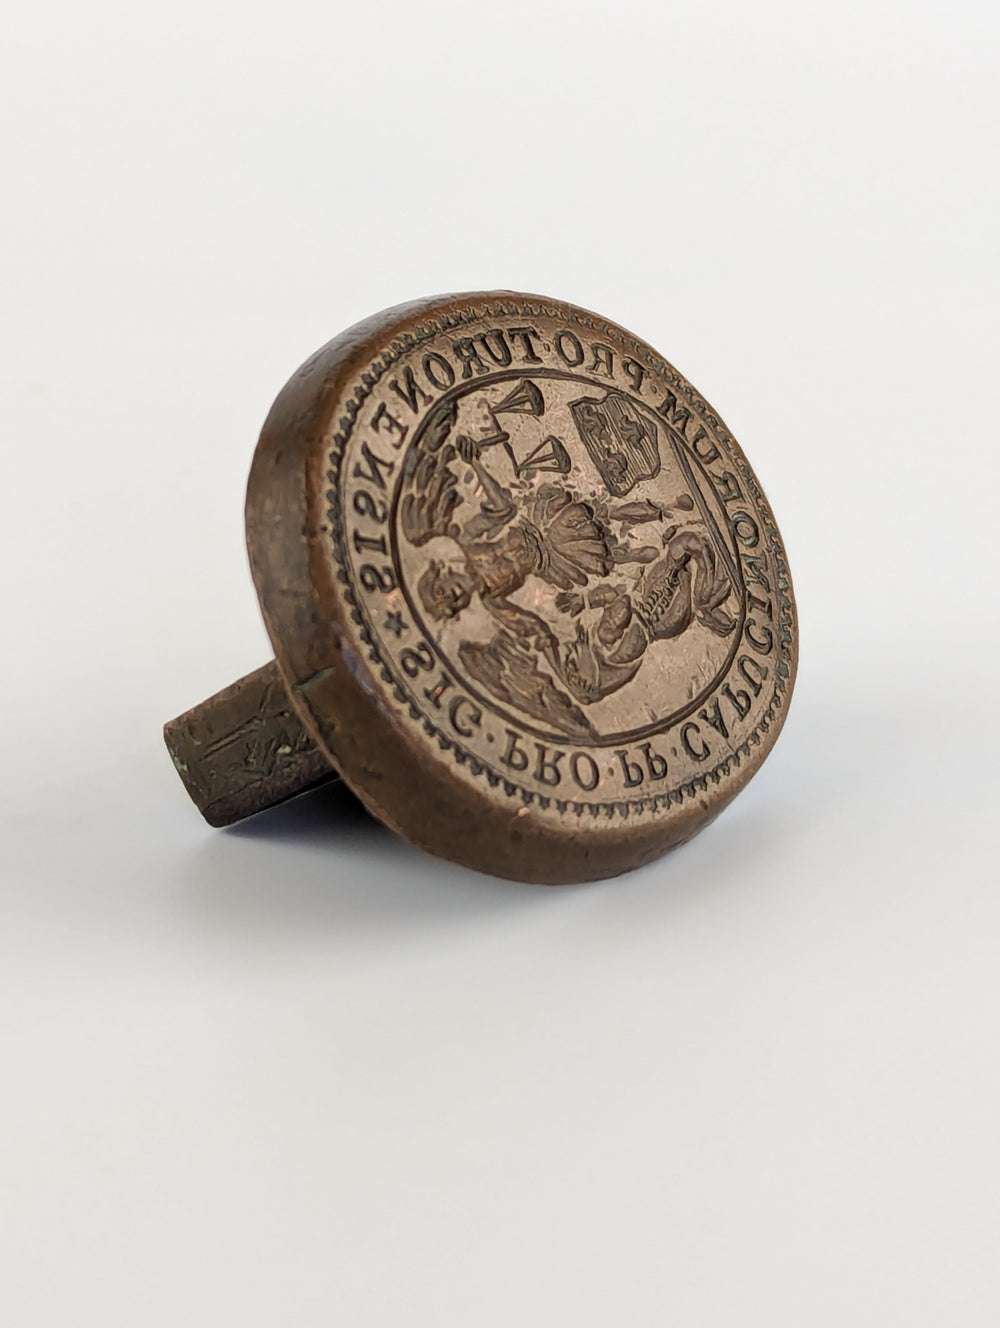 17thc Copper Seal of the Capuchins of Tours, Touraine